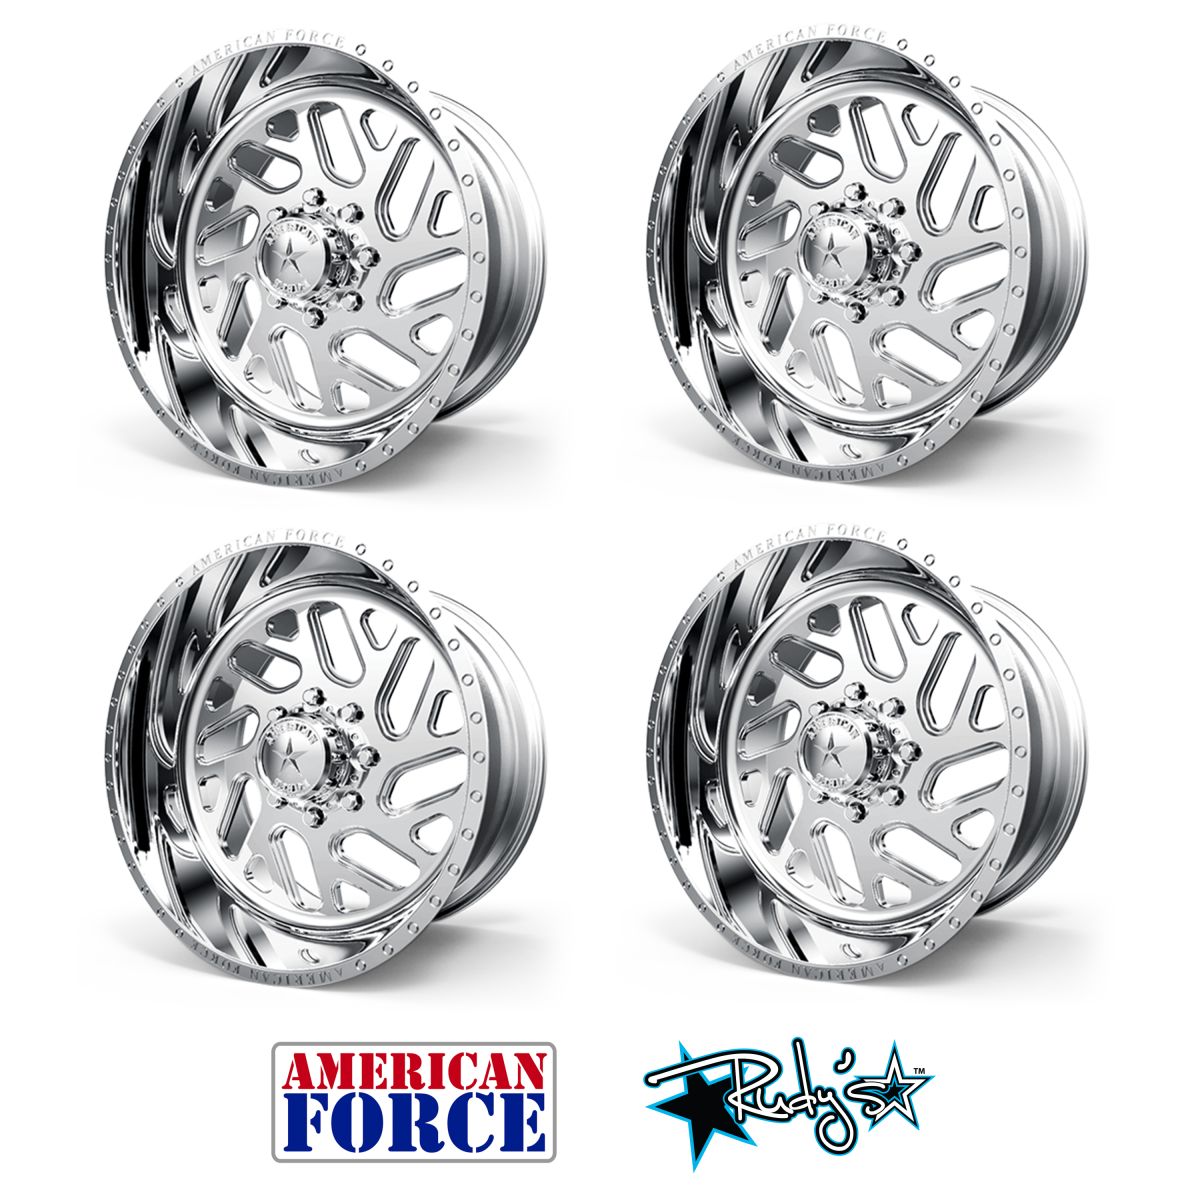 American Force - (4) American Force SS8 Rook Wheels